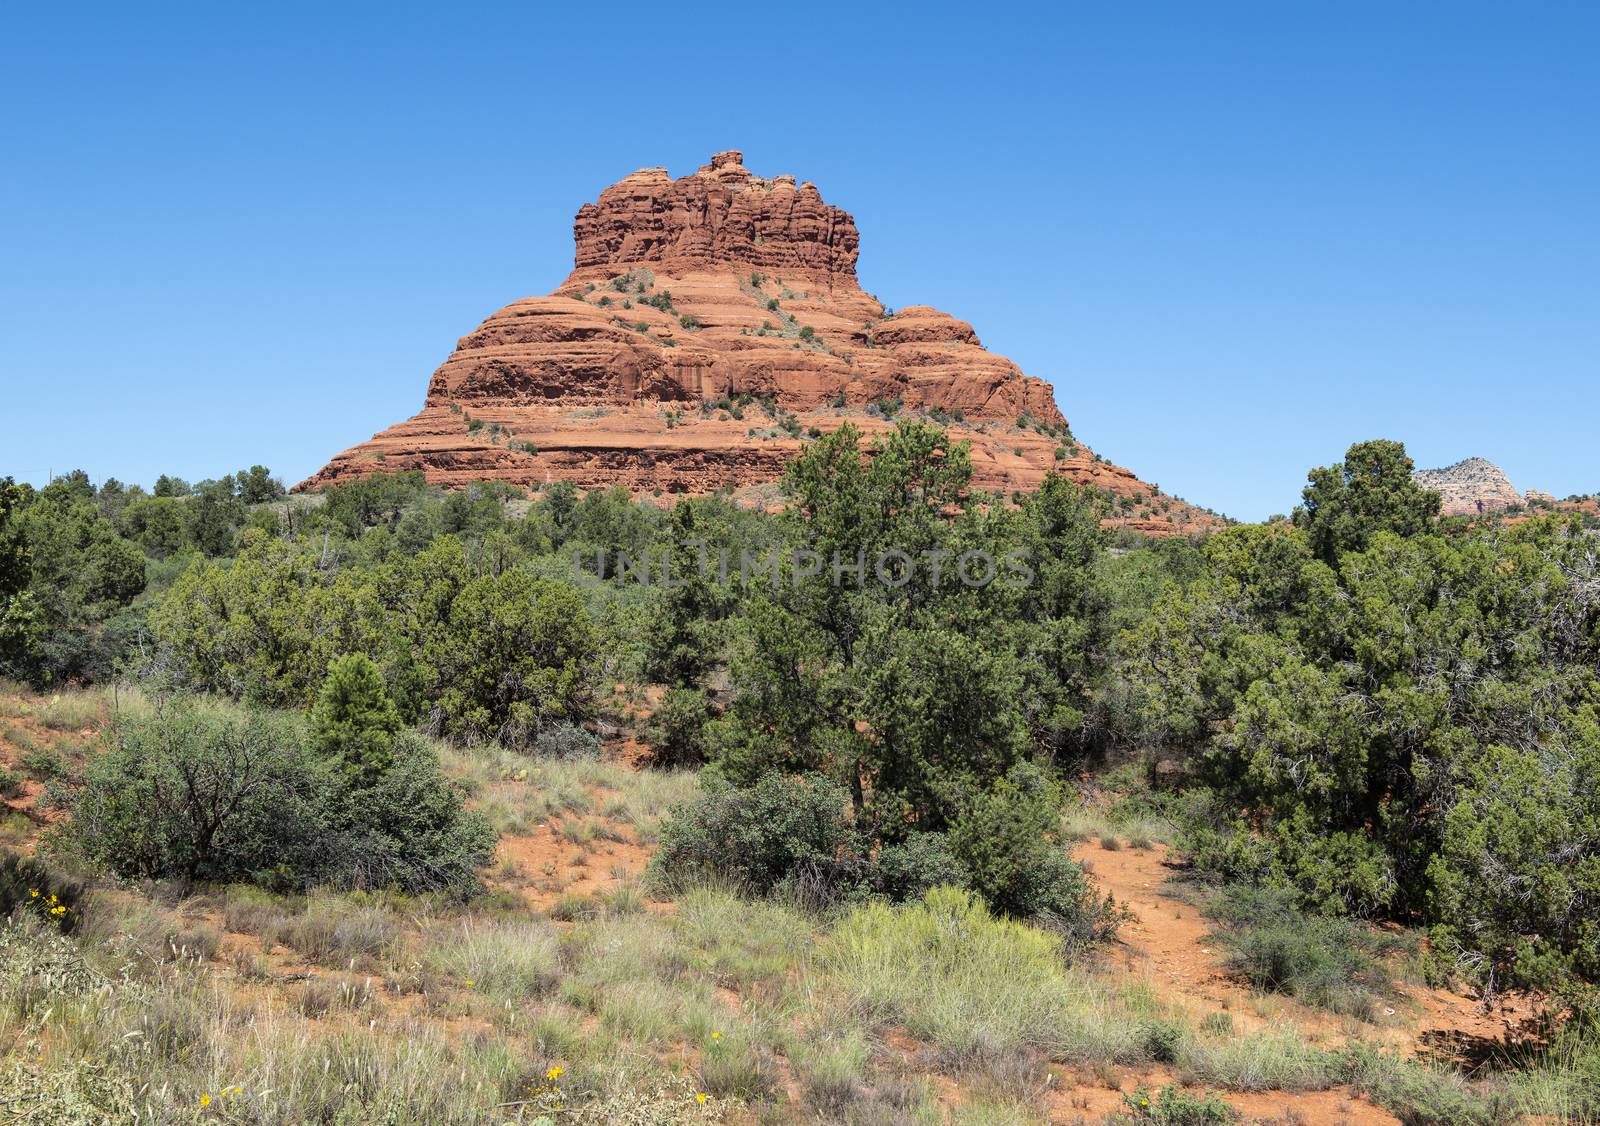 View of Bell Rock from Red Rock Scenic Byway in Sedona, Arizona by Njean